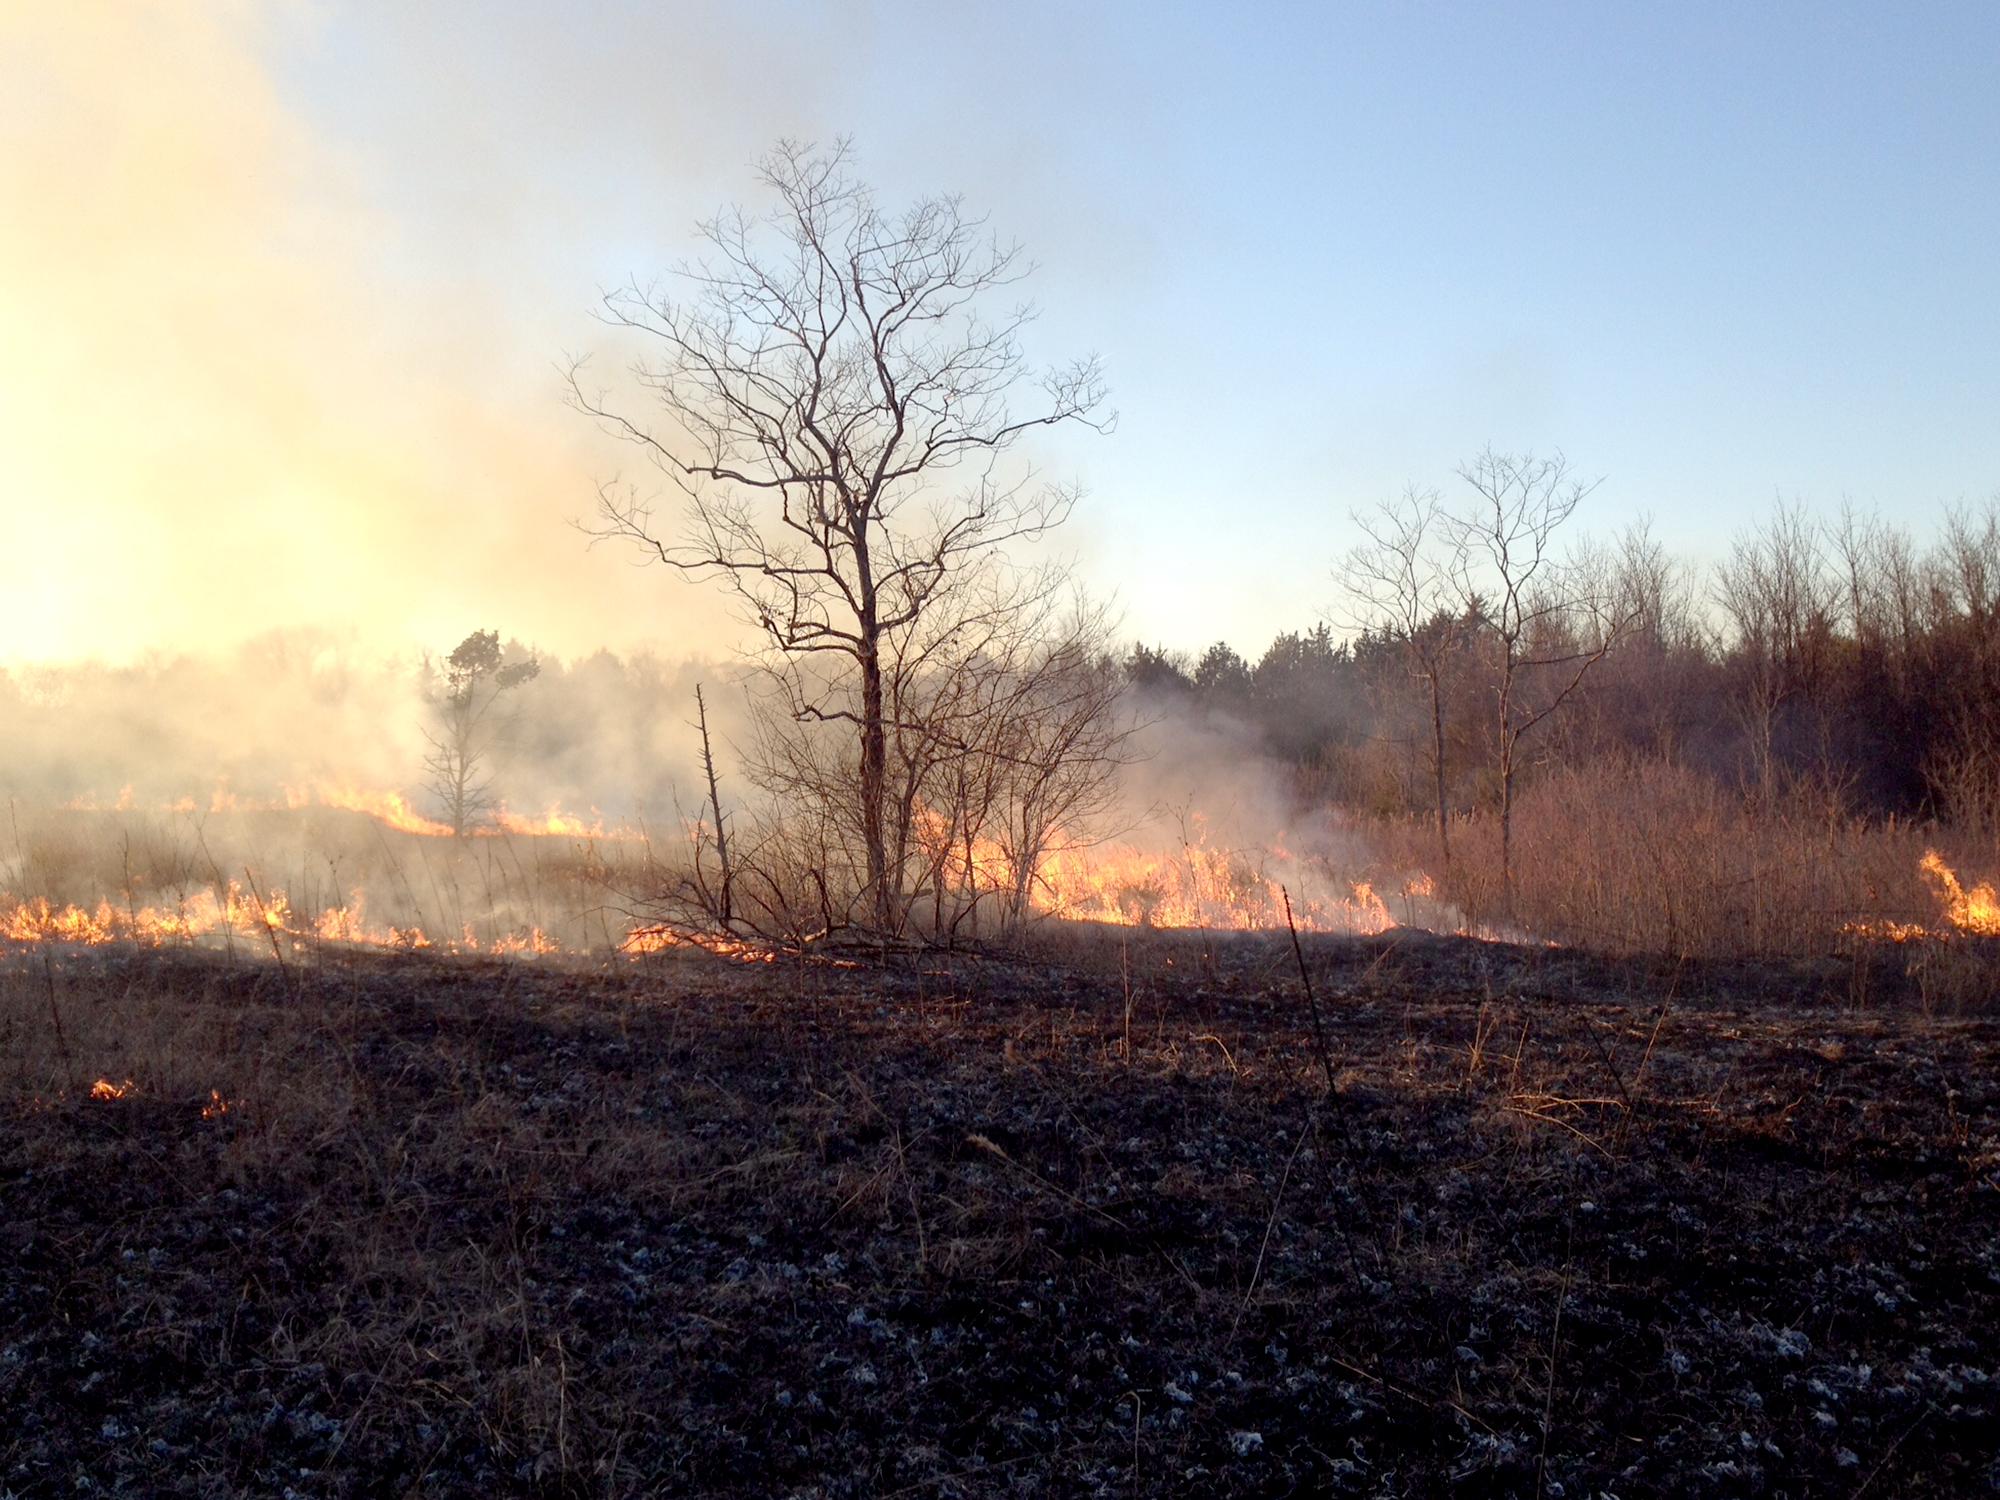 Strong winds and fires can ruin an otherwise beautiful day. Before you light a fire, consider conditions and control options if the fire begins to move in unwanted directions. (Photo by MSU Extension Service/Andrew Smith)